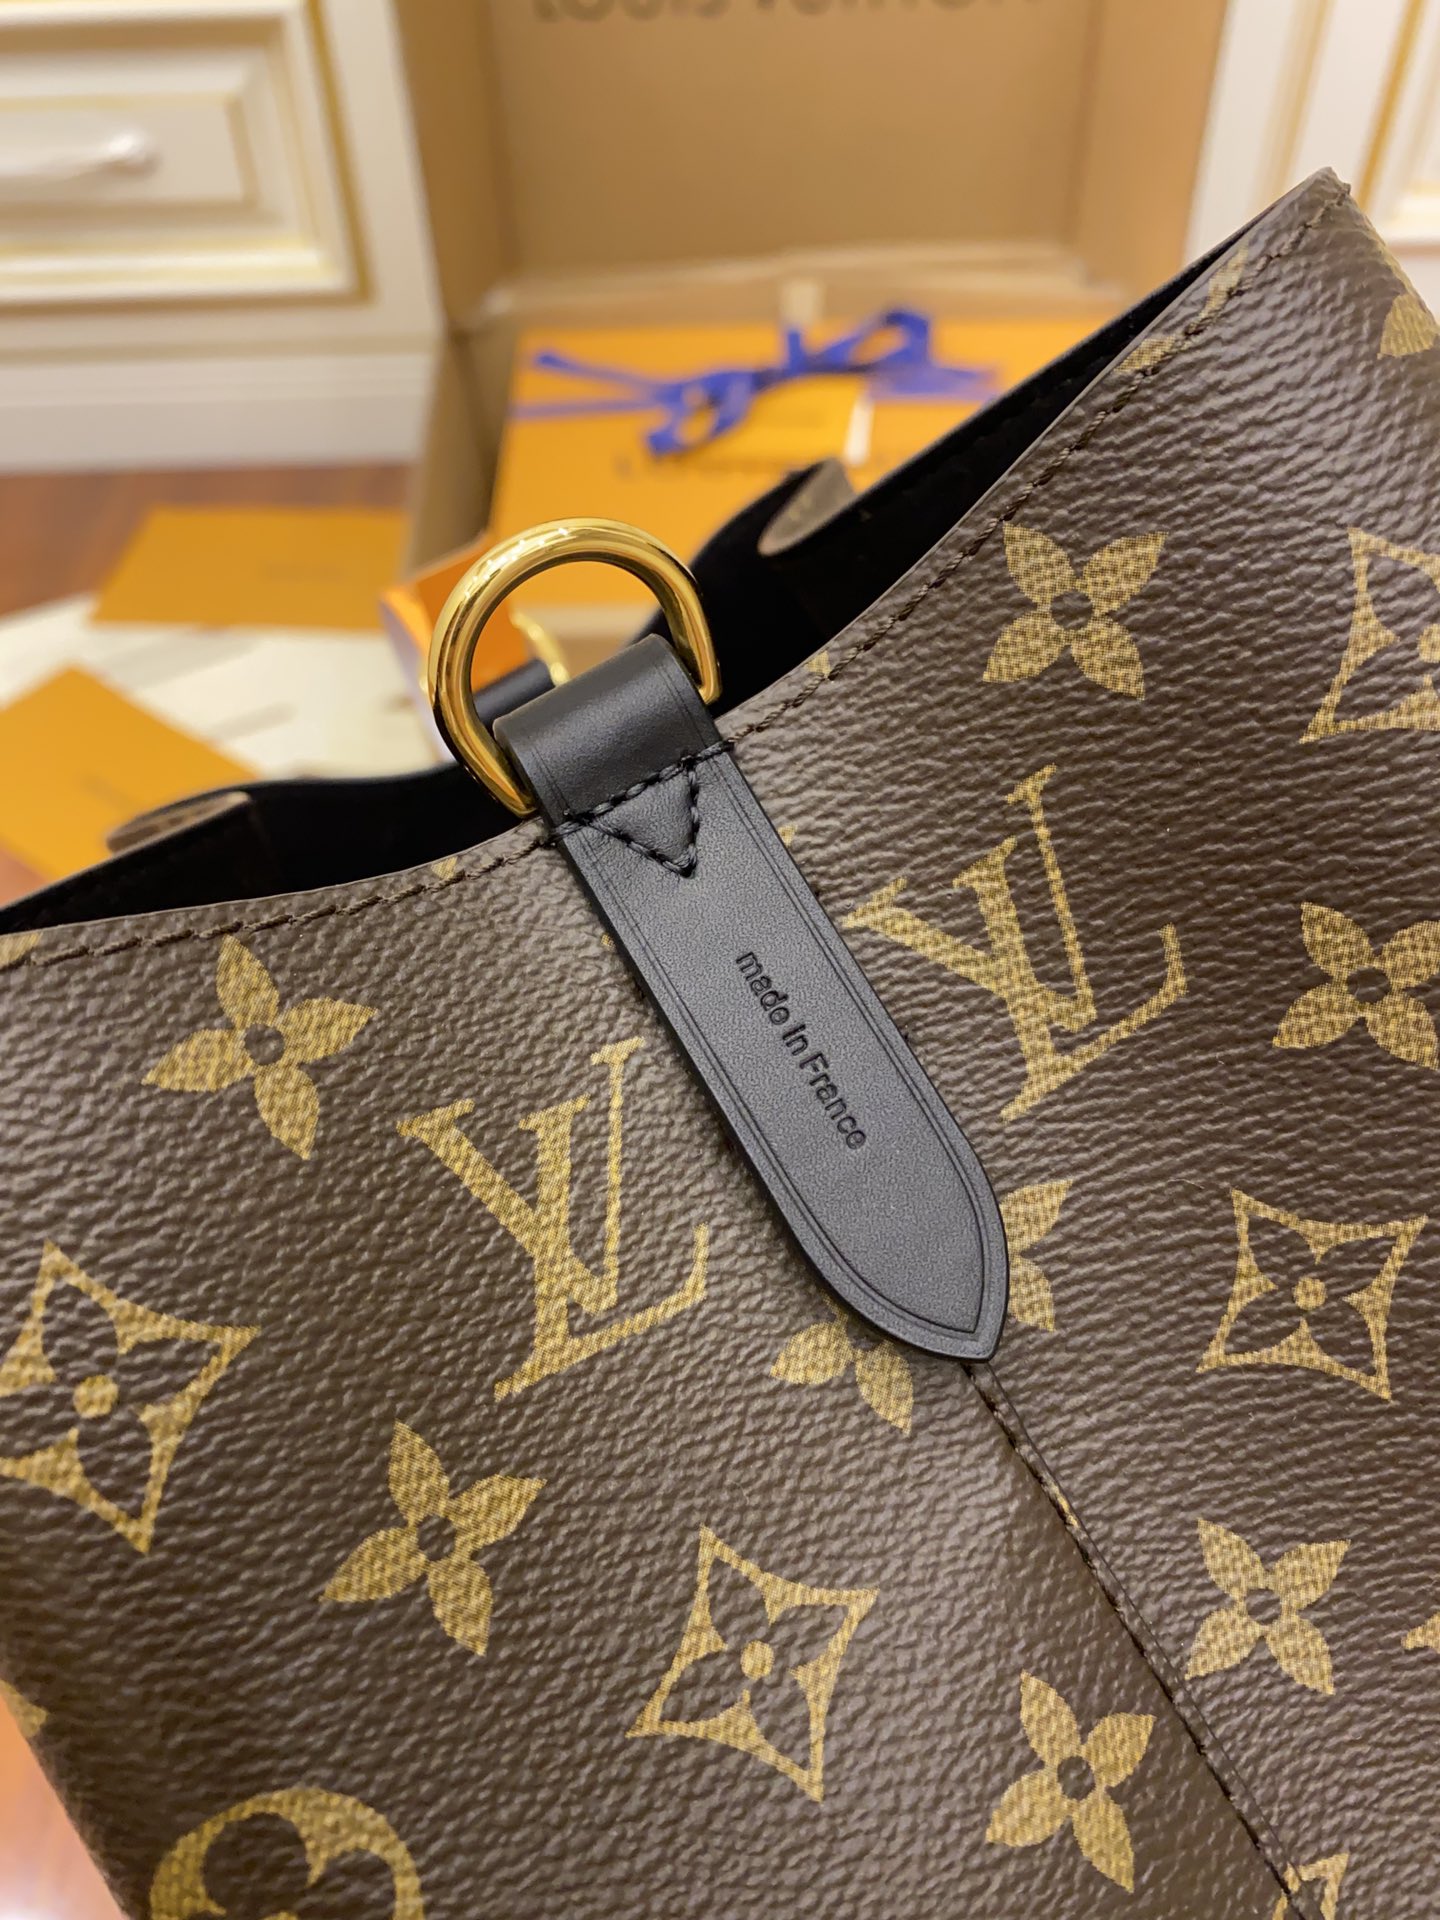 Replica Louis Vuitton Damier Azur NeoNoe MM With Braided Strap N50042  BLV044 for Sale